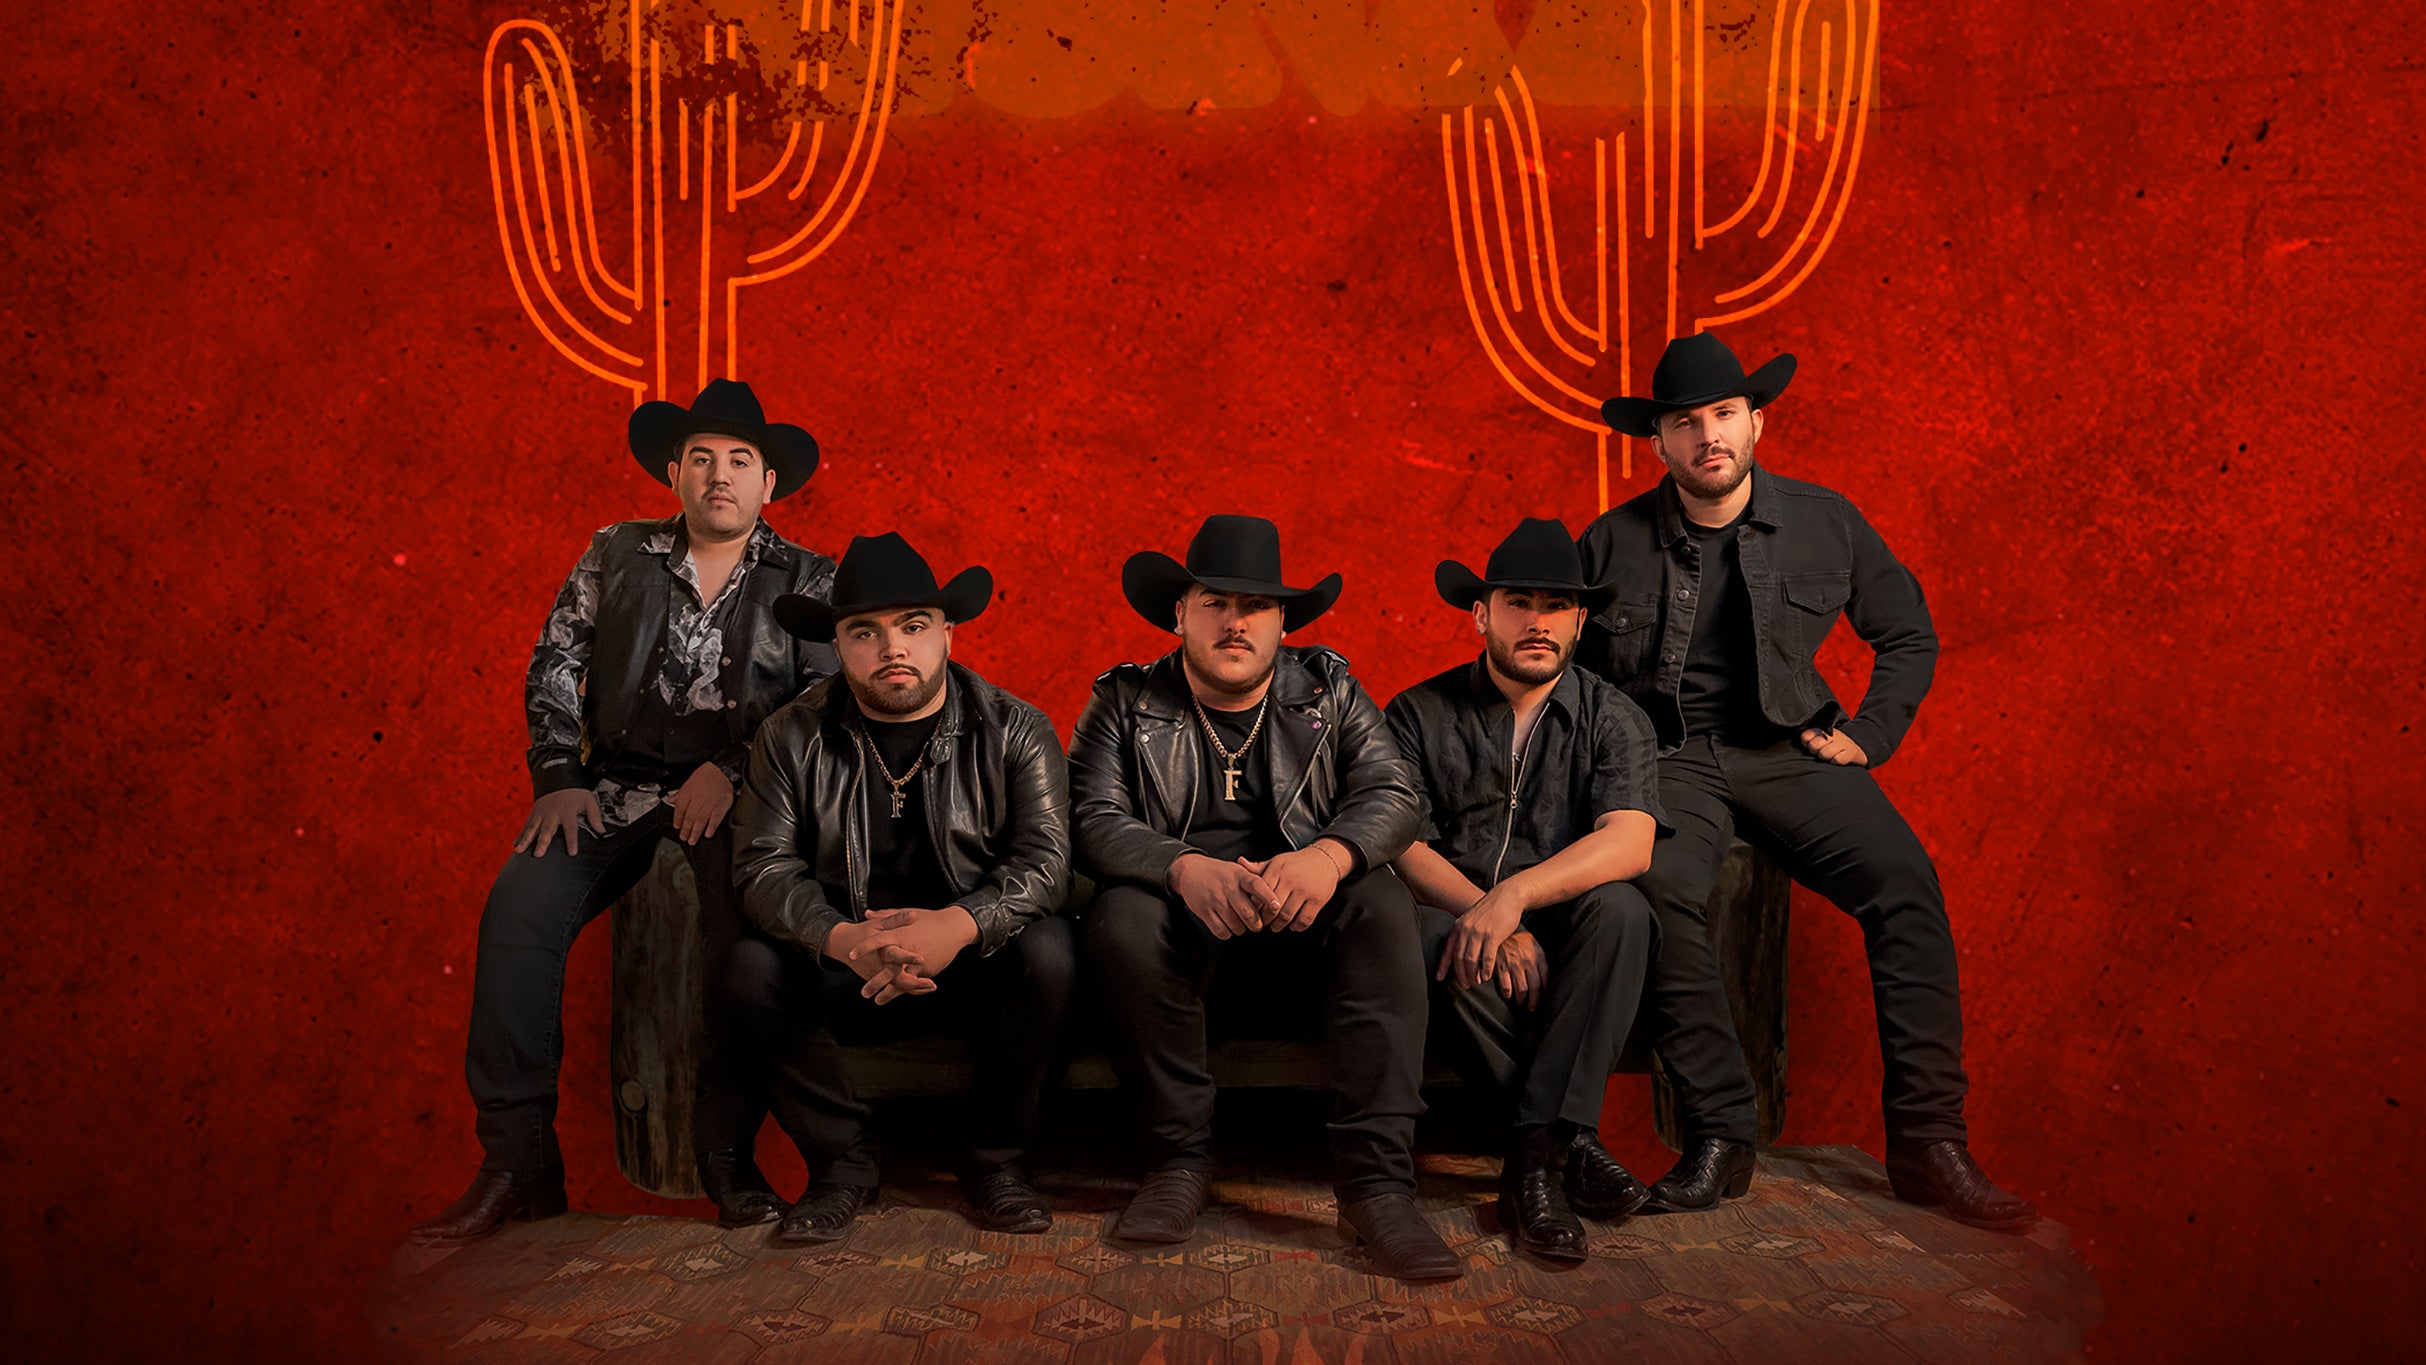 Grupo Frontera: El Comienzo Tour 2023 free presale code for early tickets in Tysons